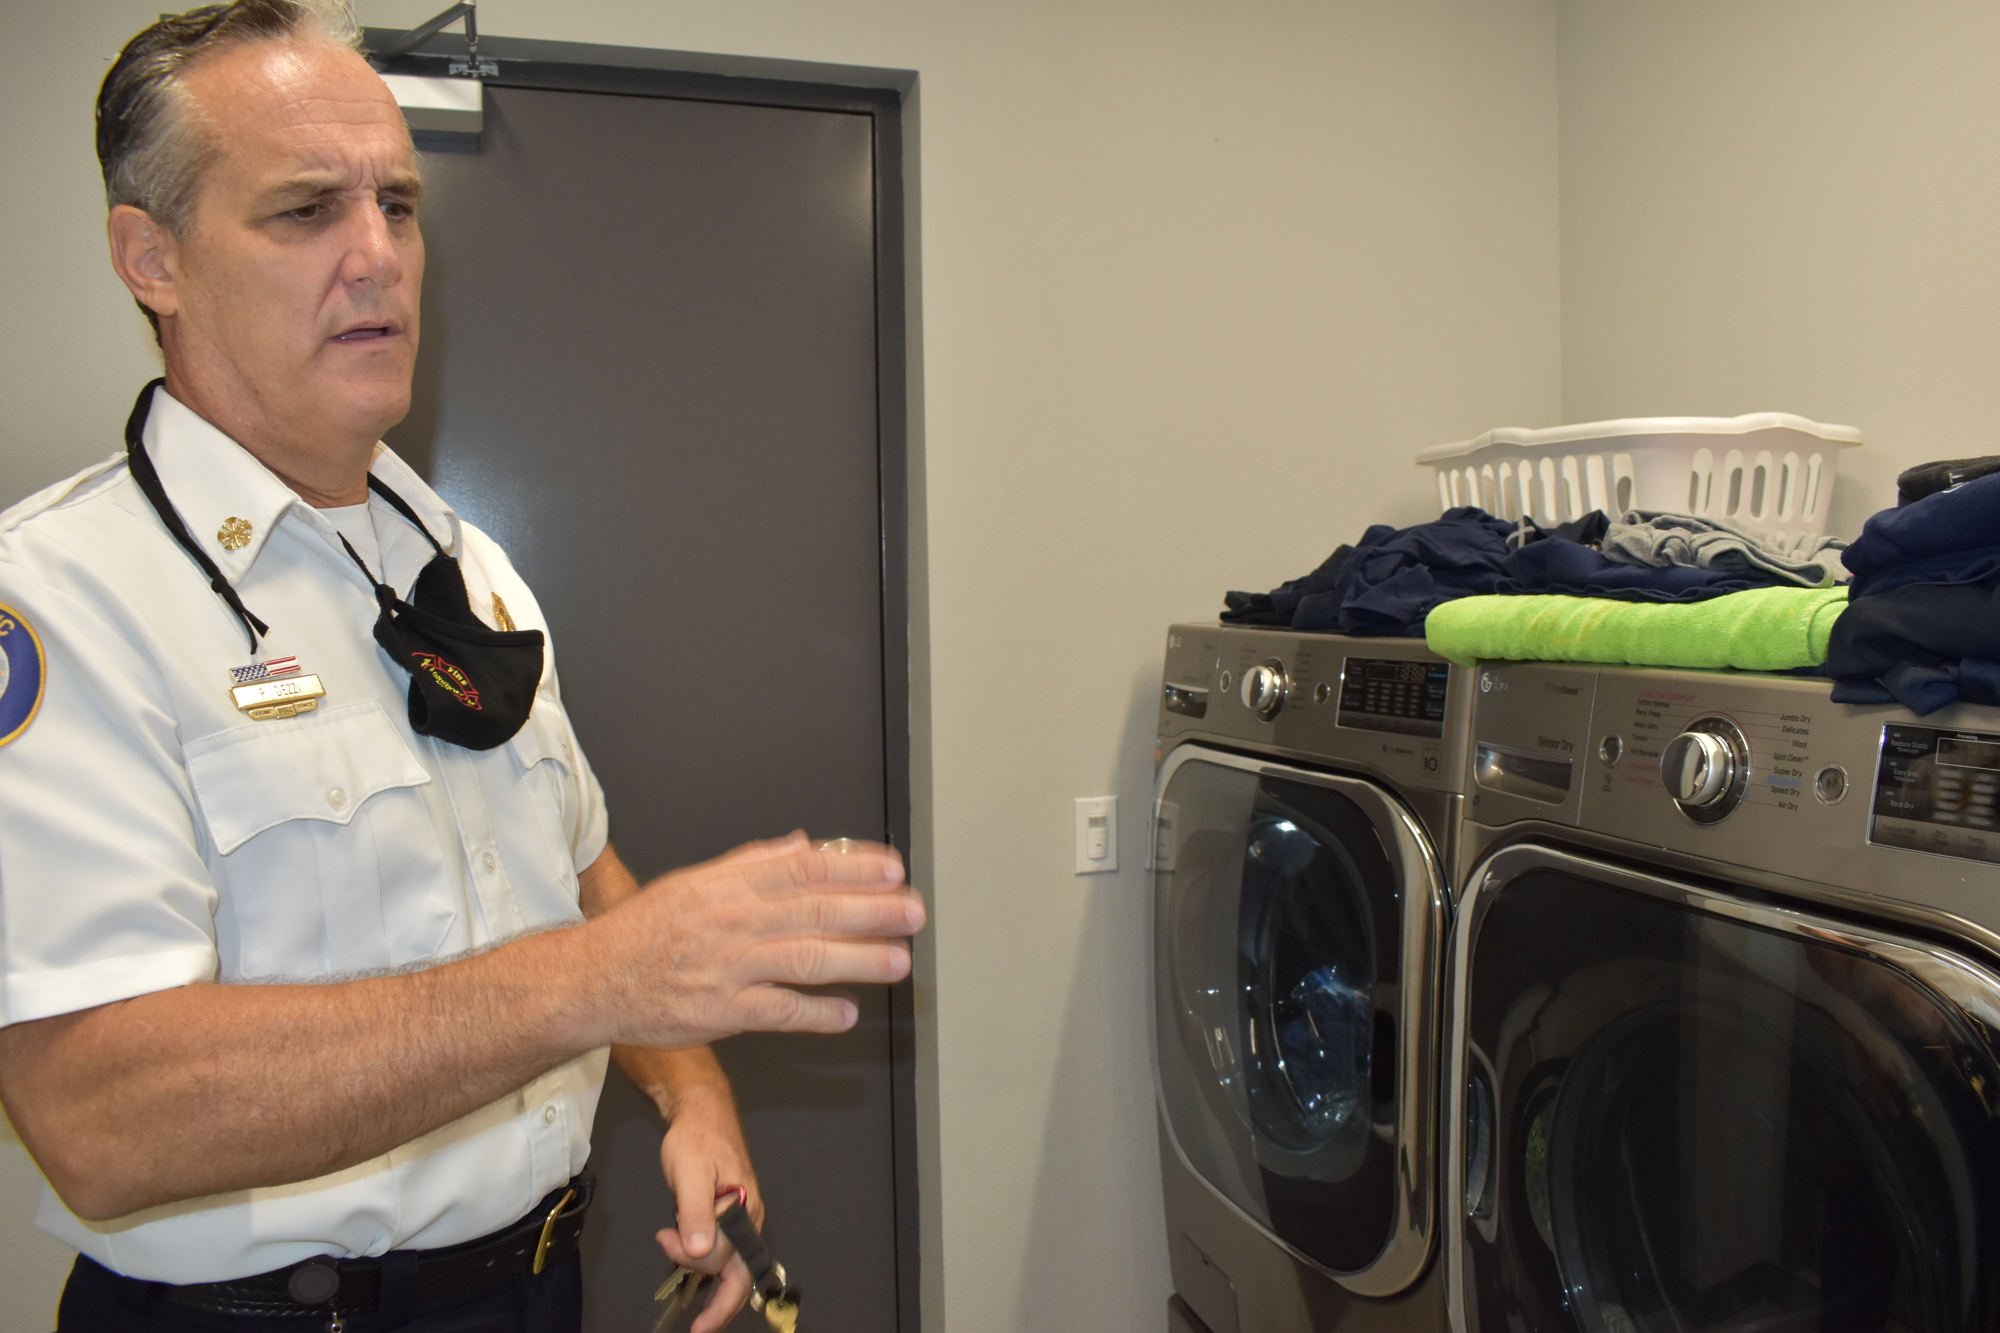 Fire Station 91 requires firefighters and paramedics to wash their gear when returning from a call to remove possible carcinogens.